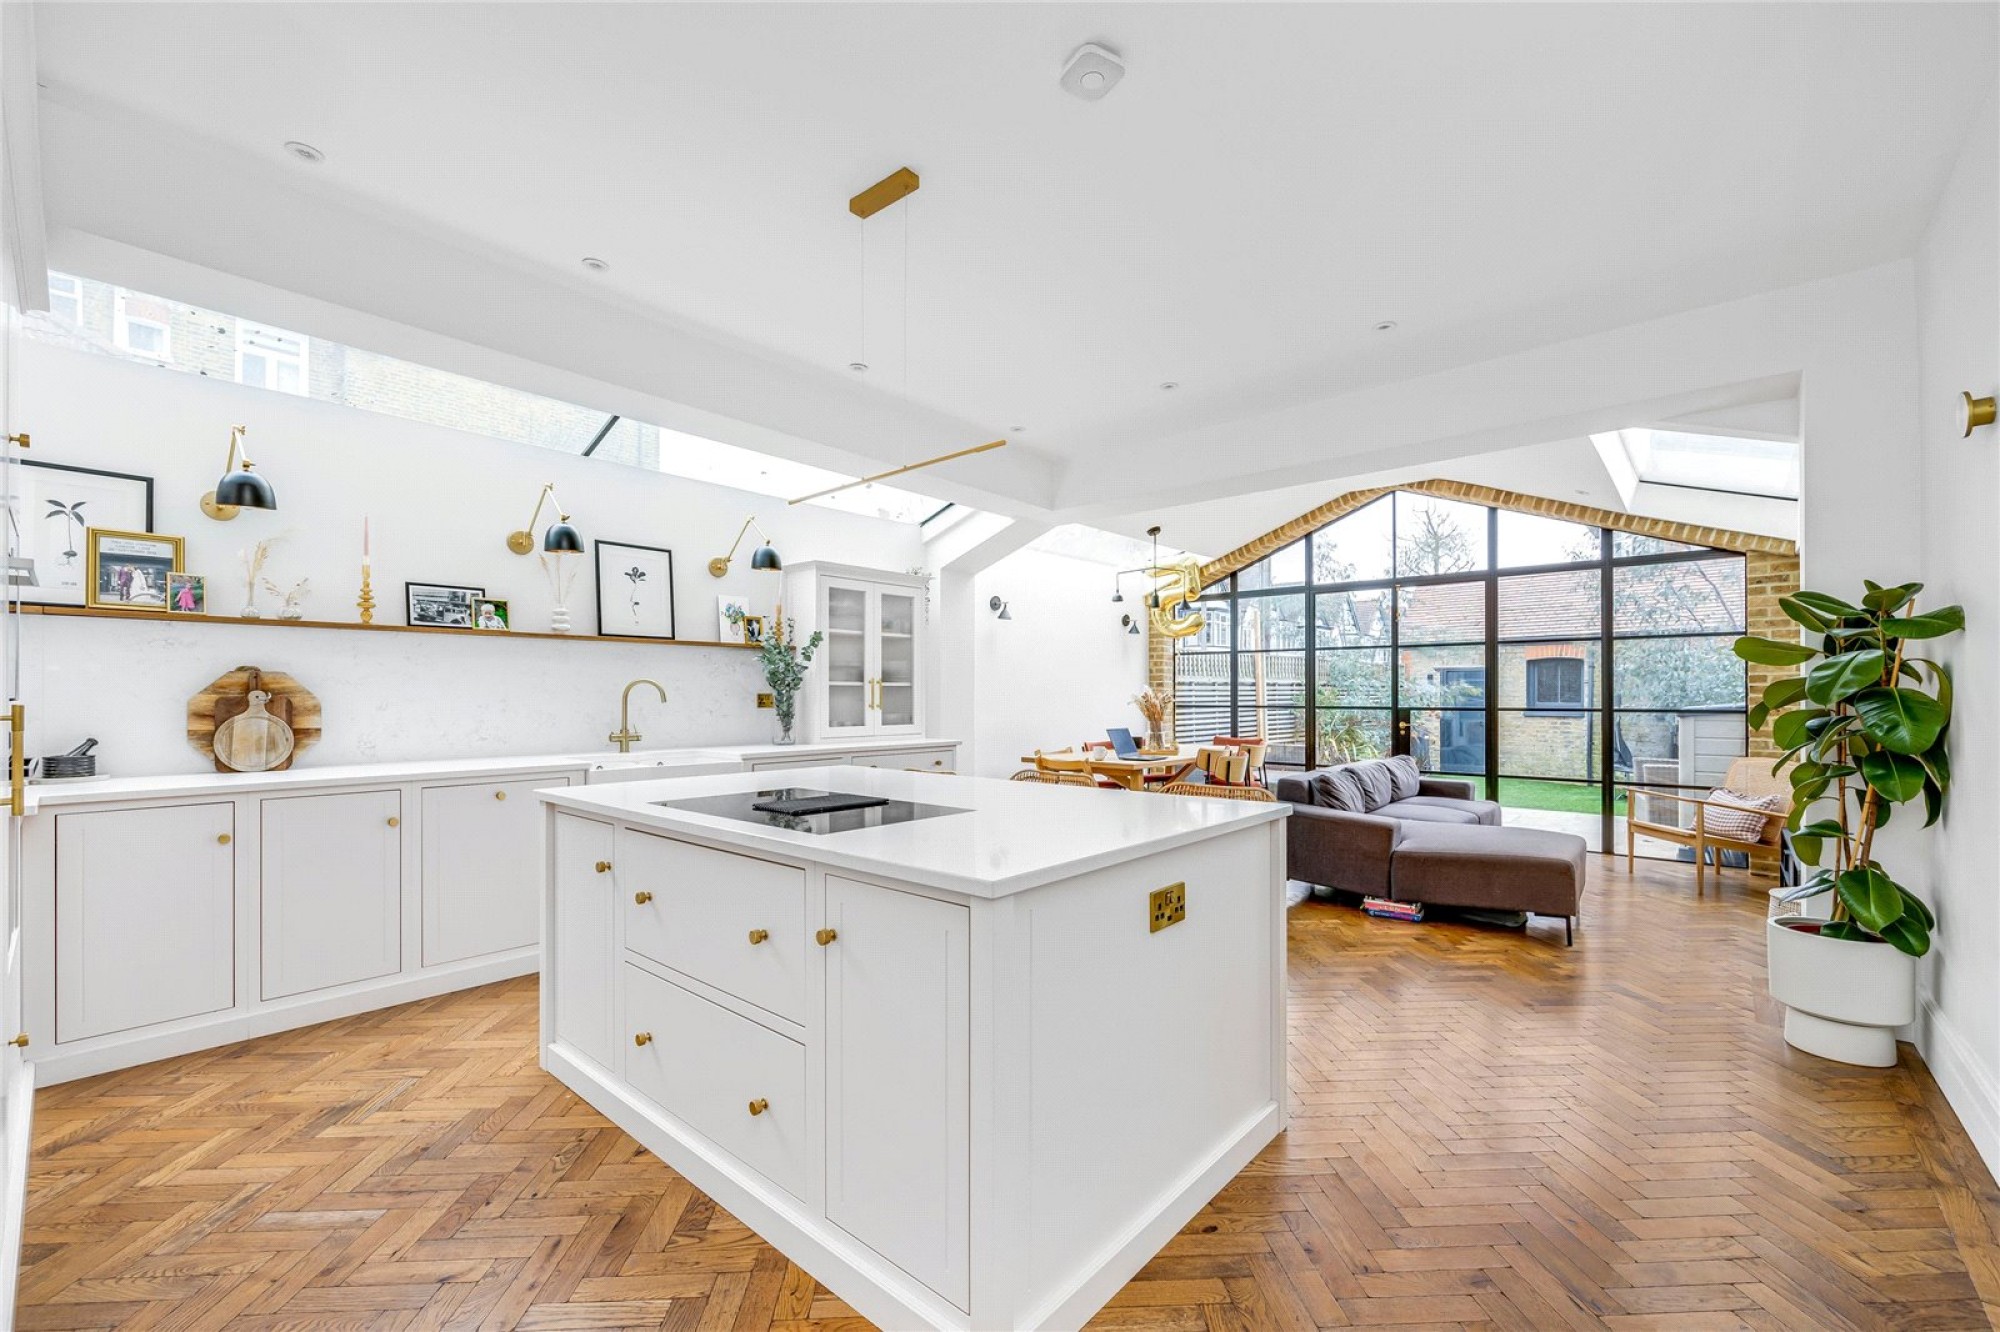 Clairview Road, London, SW16 - £1,450,000